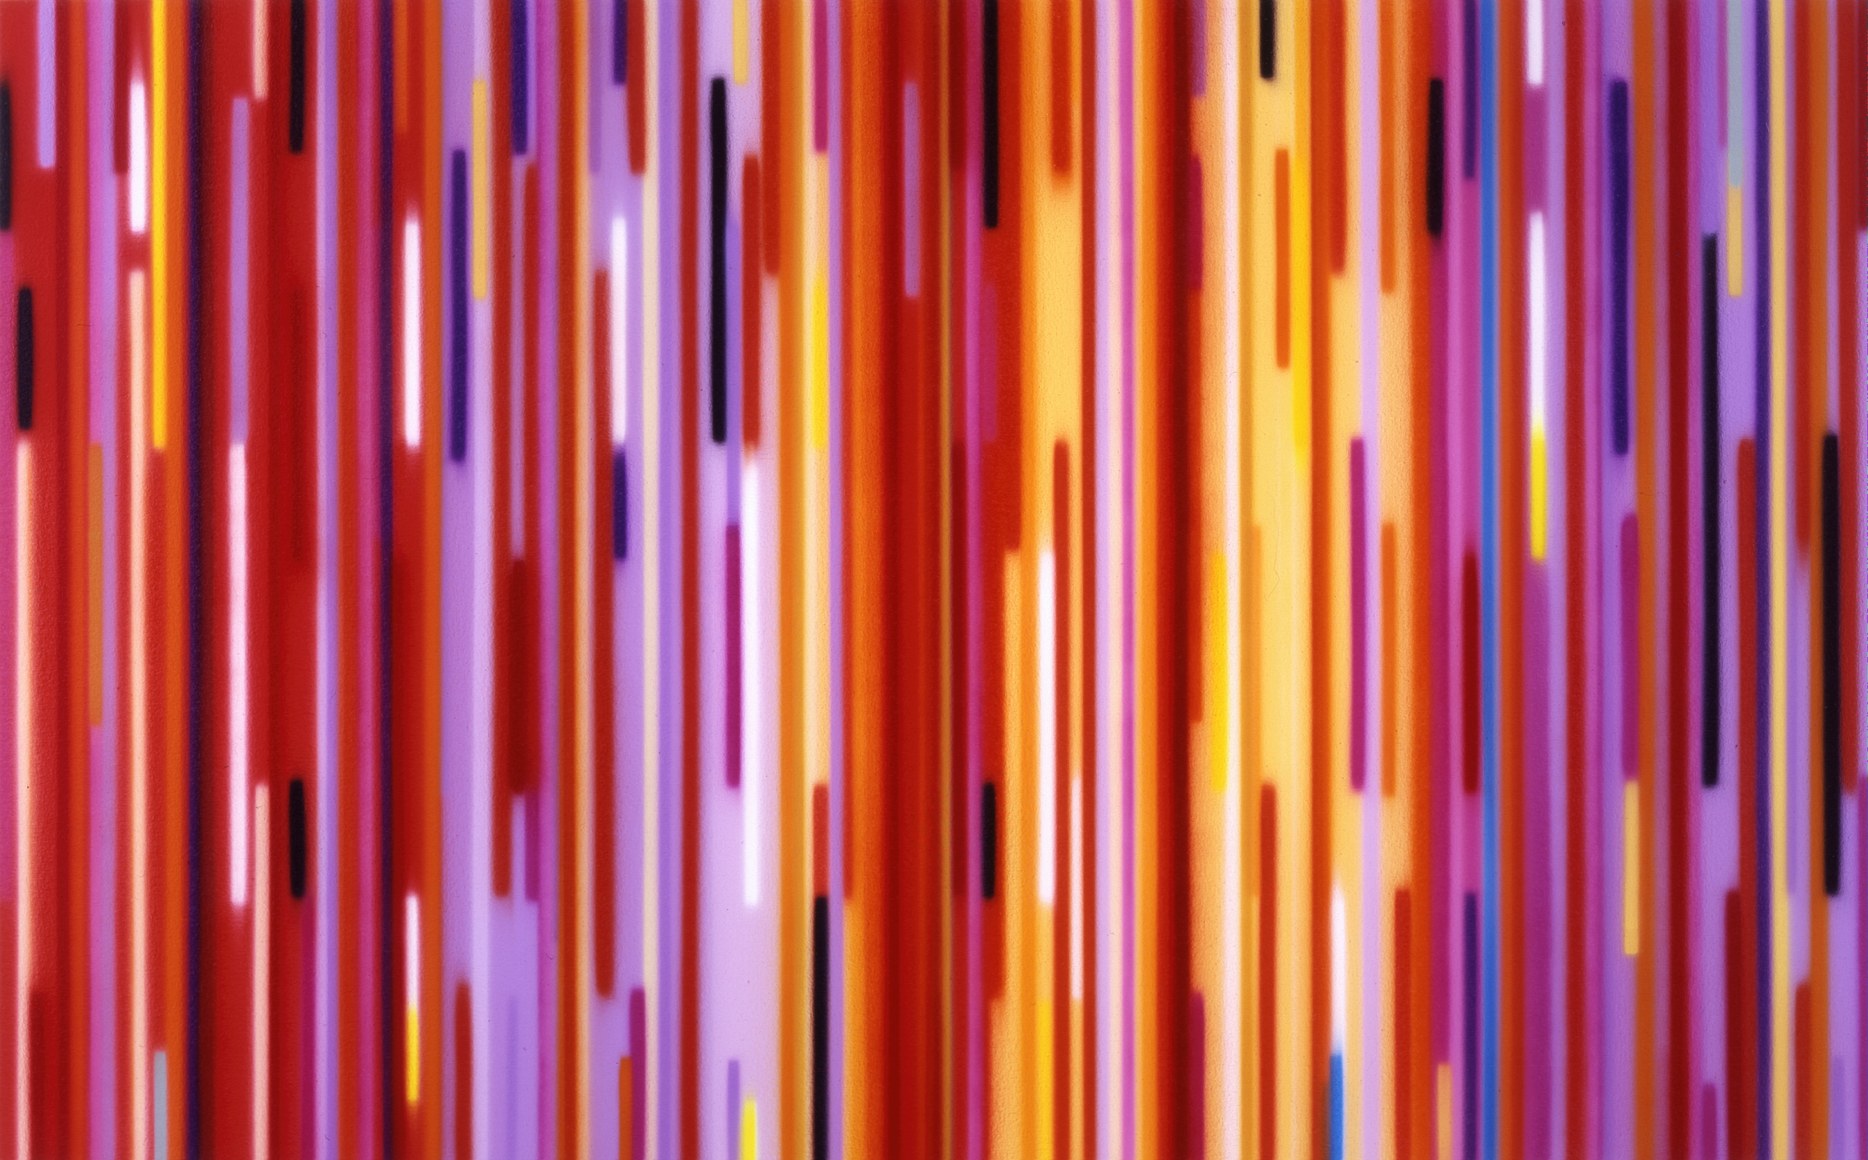 Rise, 2001, Synthetic polymer on canvas